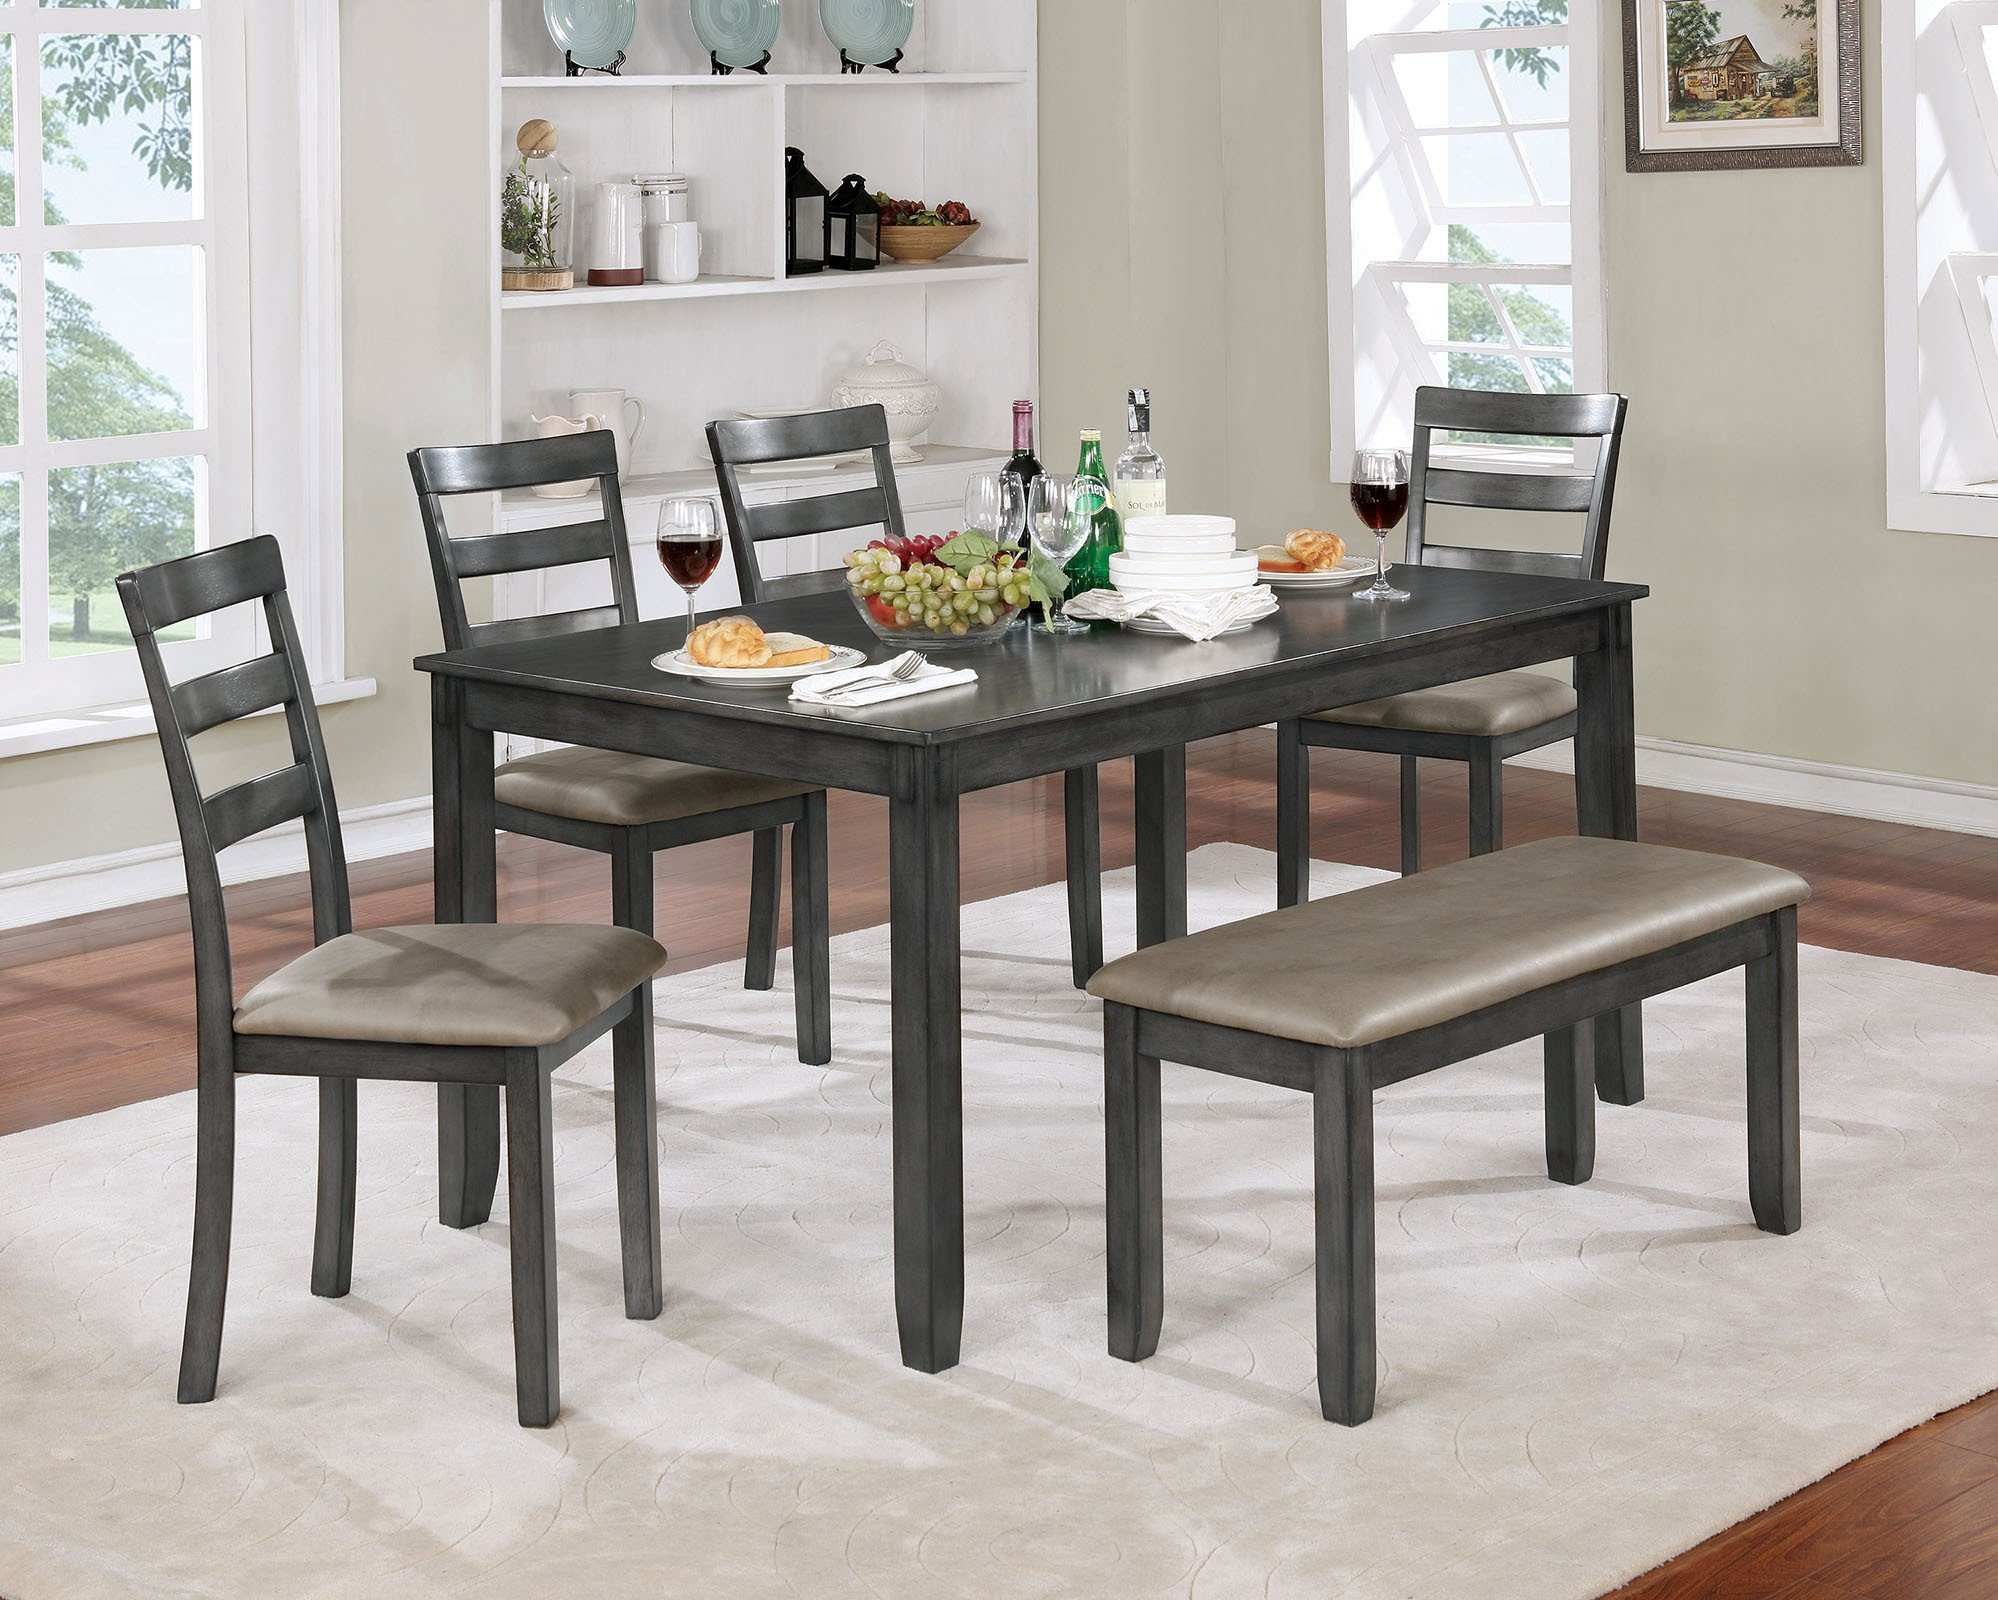 Dining Room Tables Jordans Elegant Gloria 6 Pc Dining Table throughout dimensions 1998 X 1600